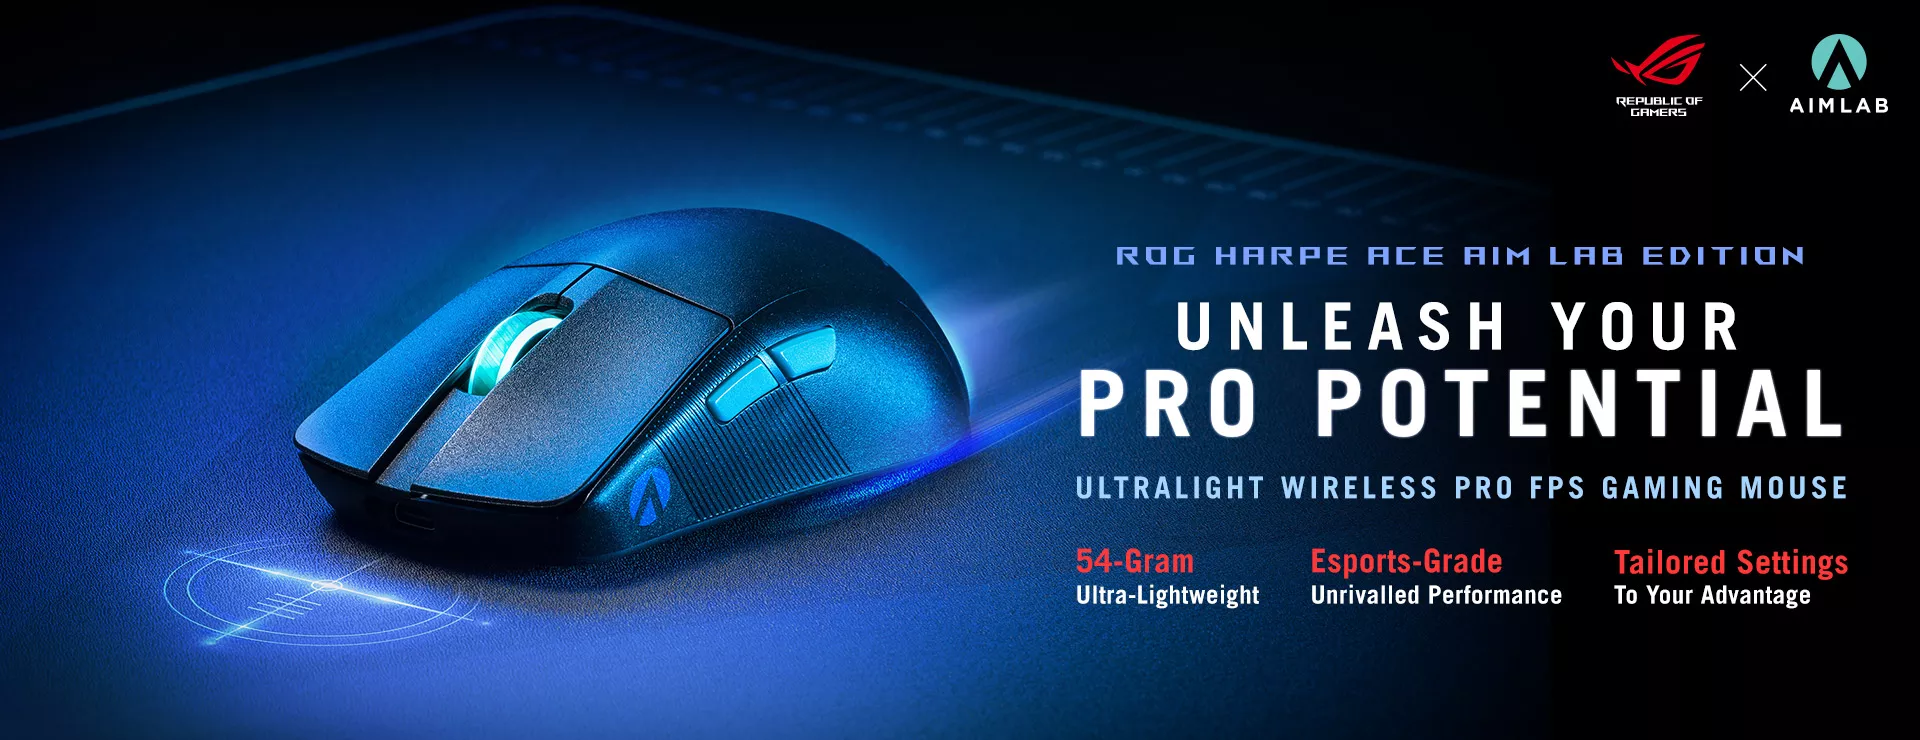 The ROG Harpe Ace Aim Lab Edition Ultralight Wireless FPS gaming mouse weighs only 至 grams and supports esports-grade performance and synergized software features from Aim Lab